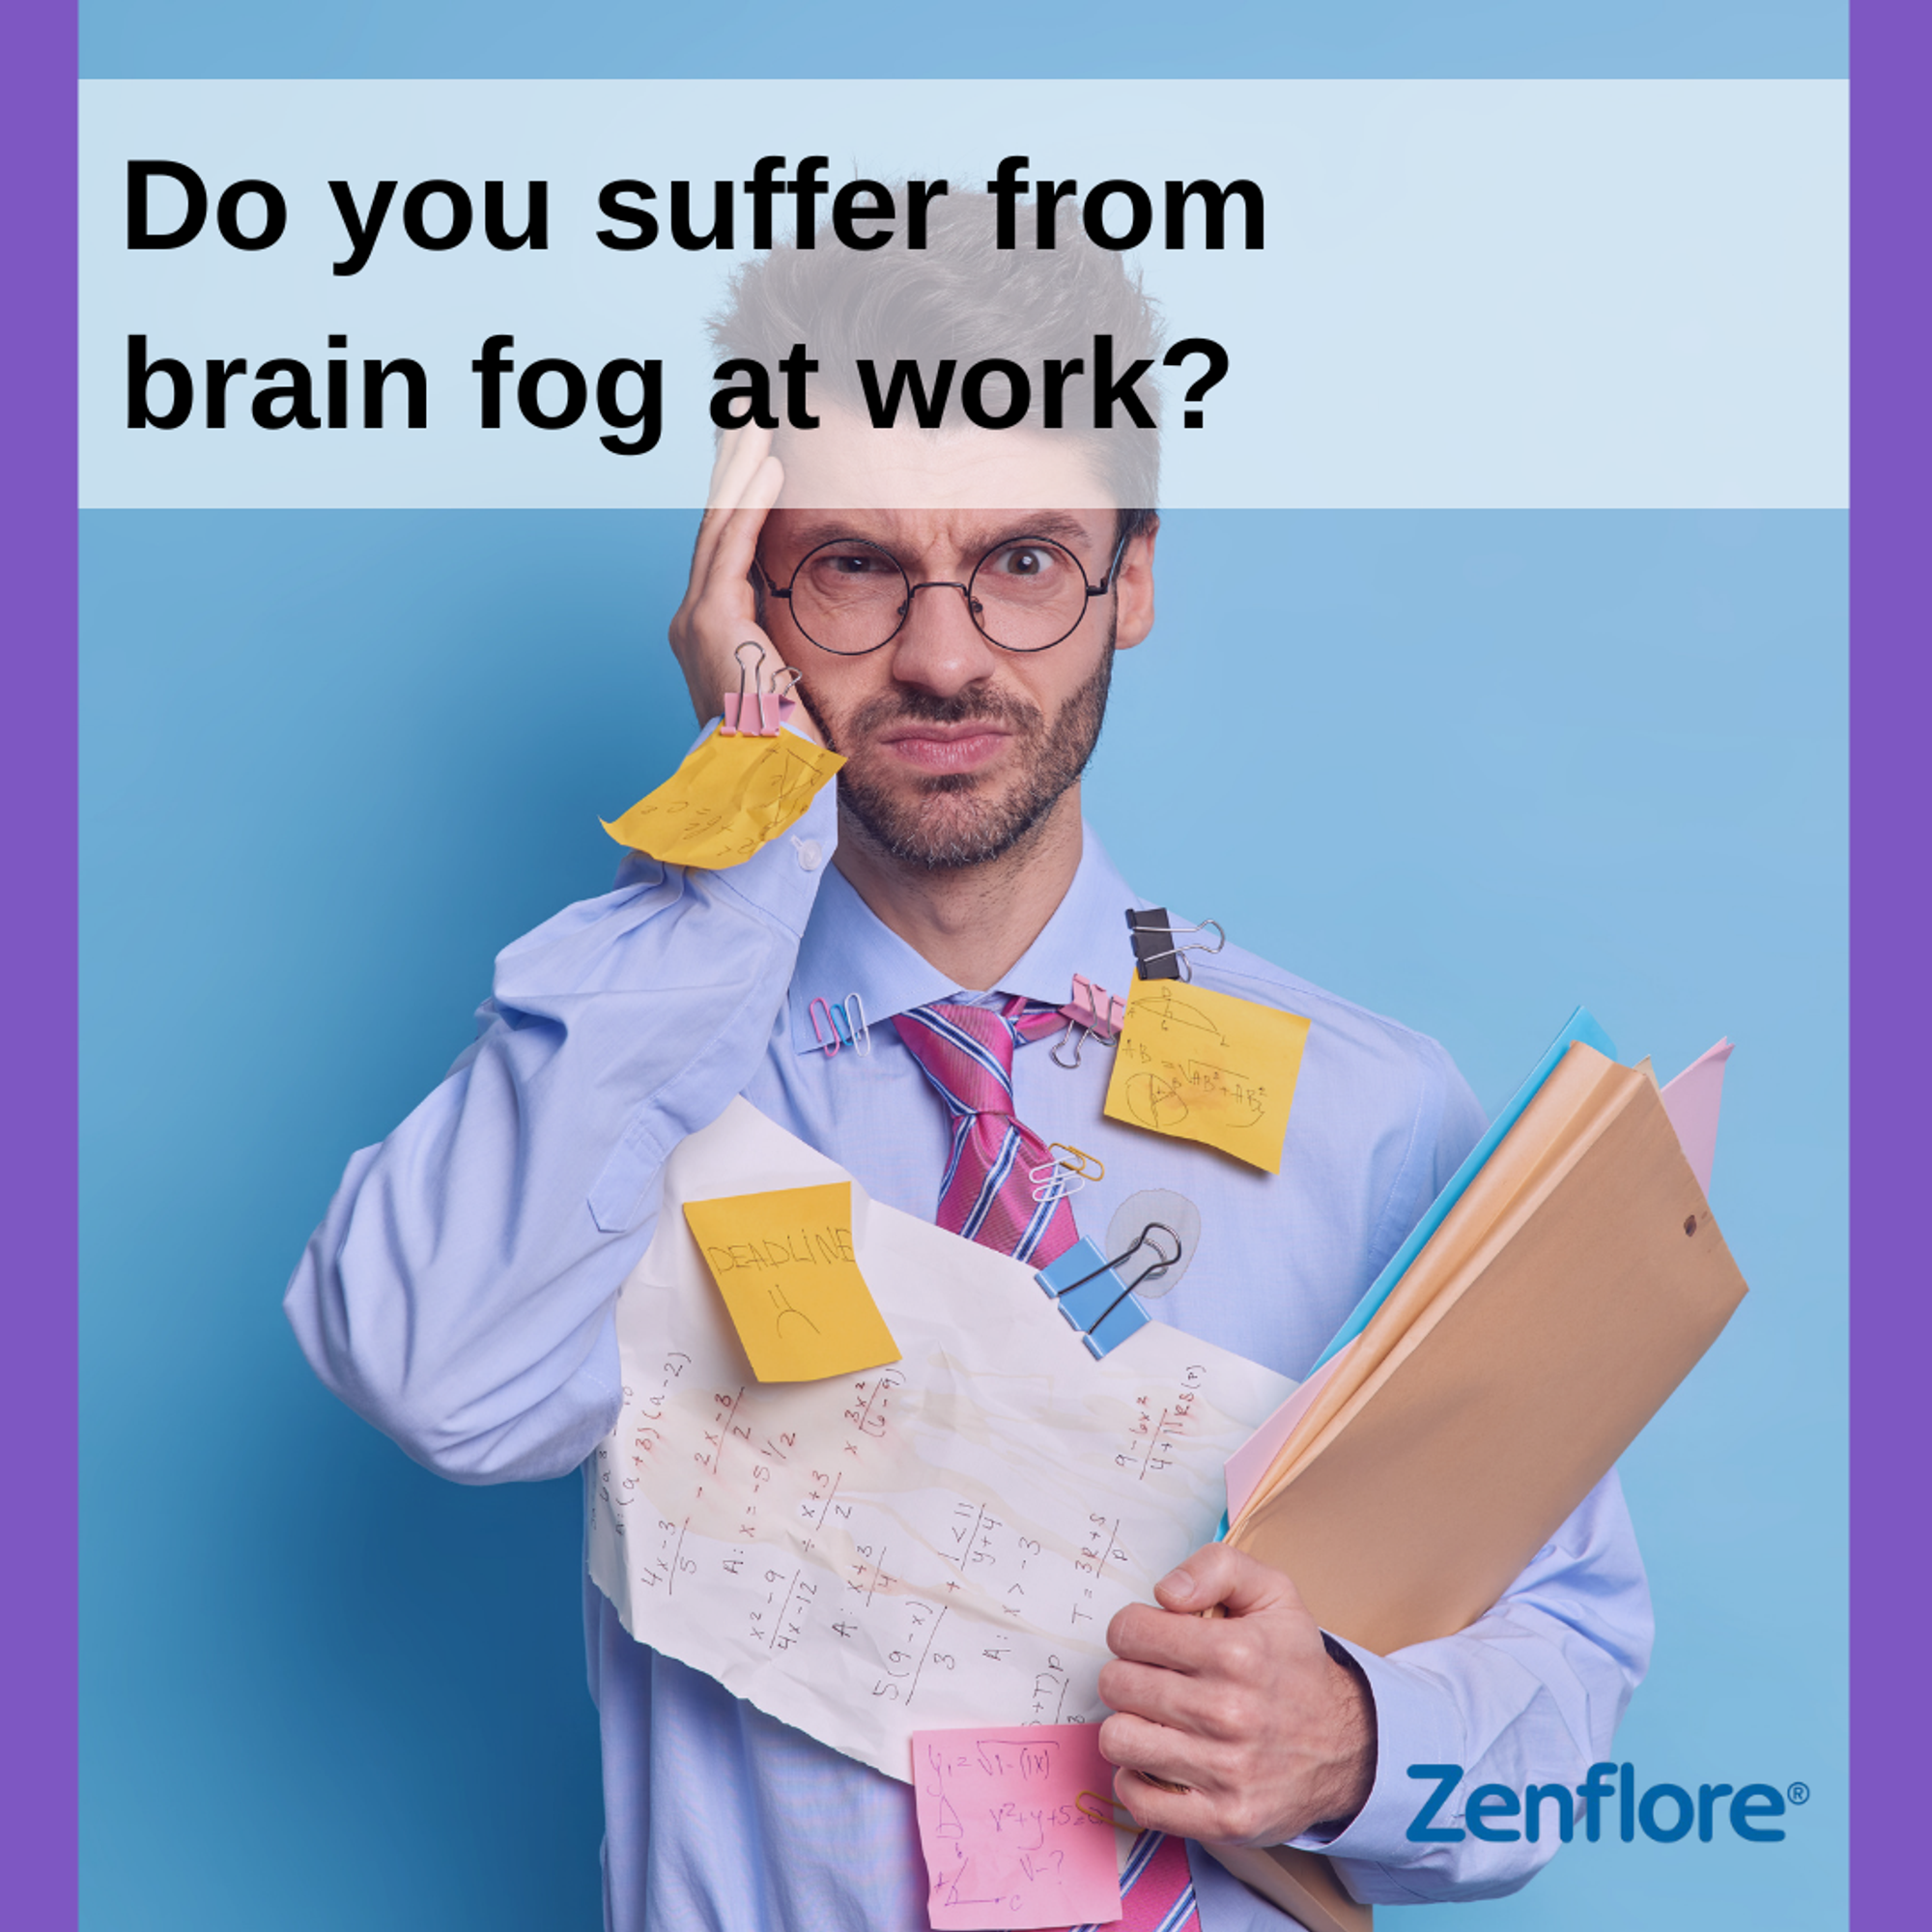 Figure 10: An Instagram post for Zenflore asking “Do you suffer from brain fog at work?”. Behind the text is a disheveled looking office worker. 